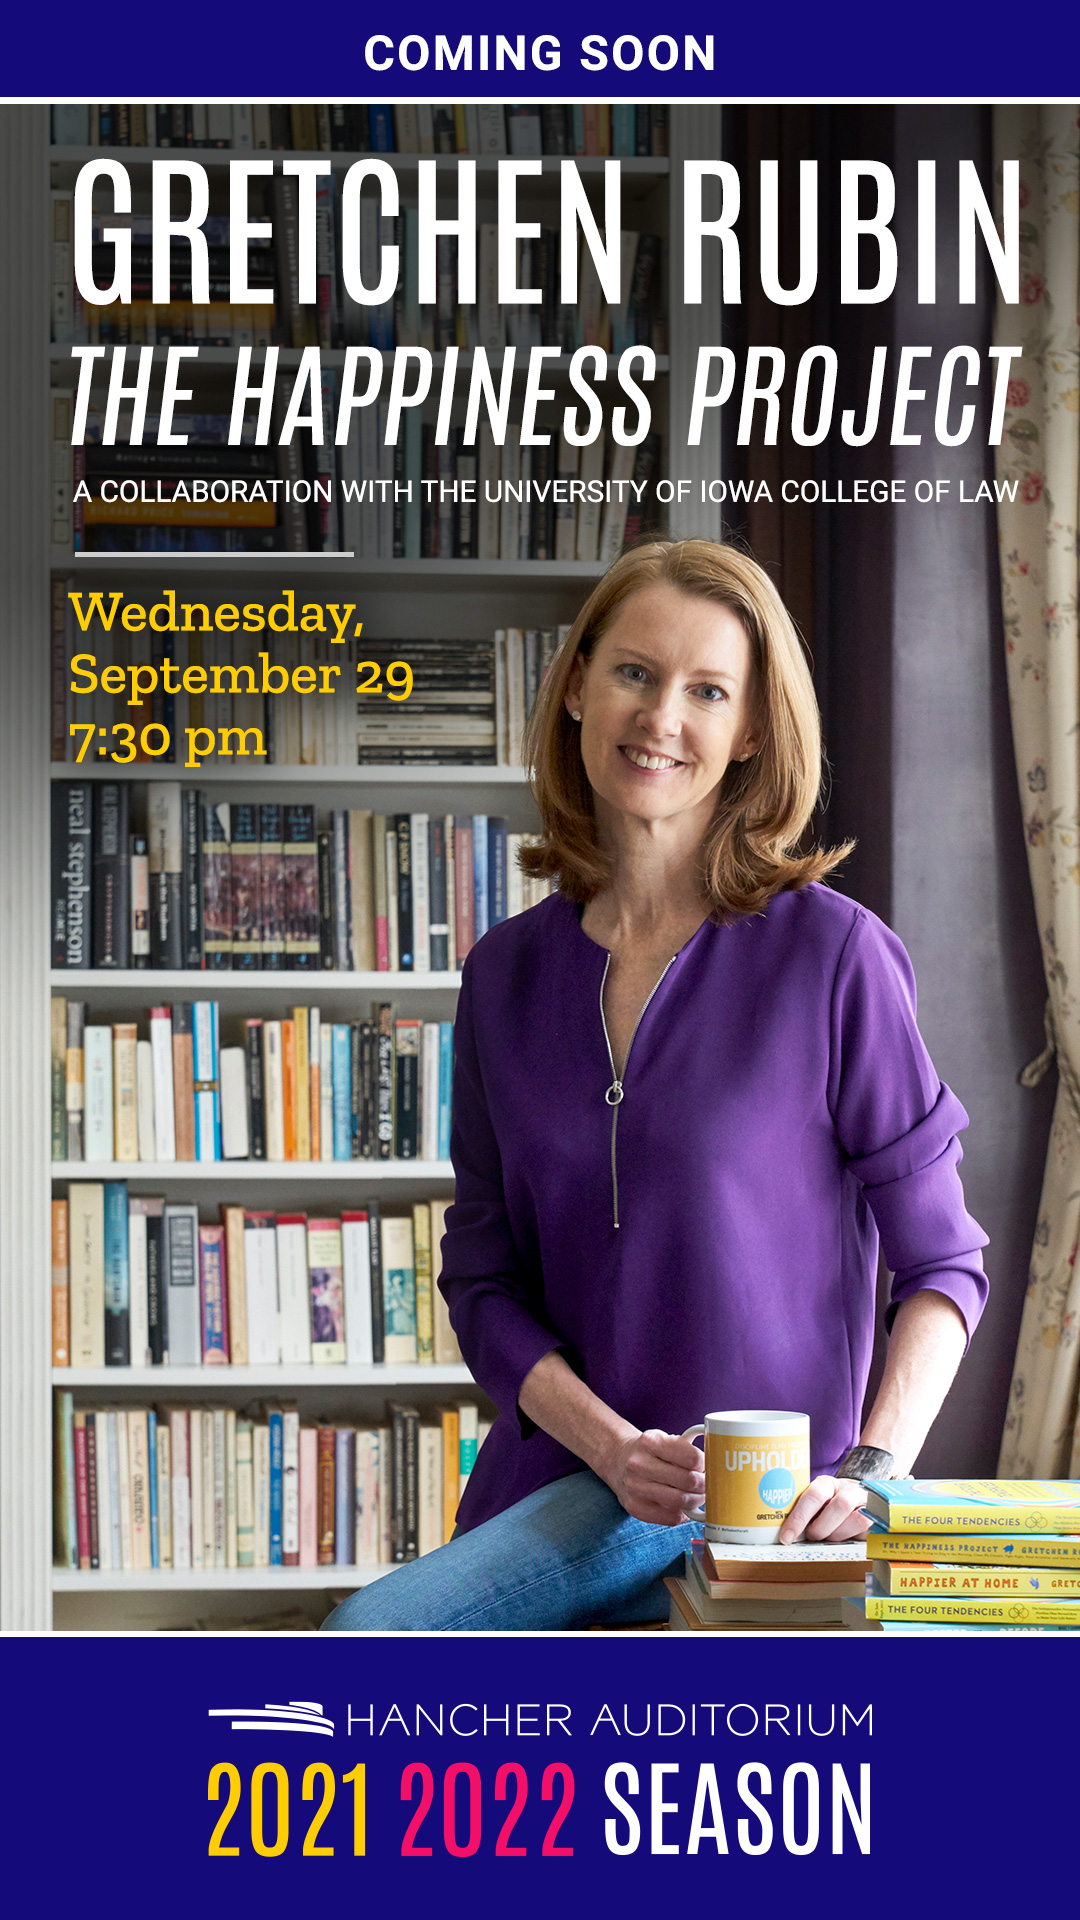 Gretchen Rubin, The Happiness Project - Coming Soon